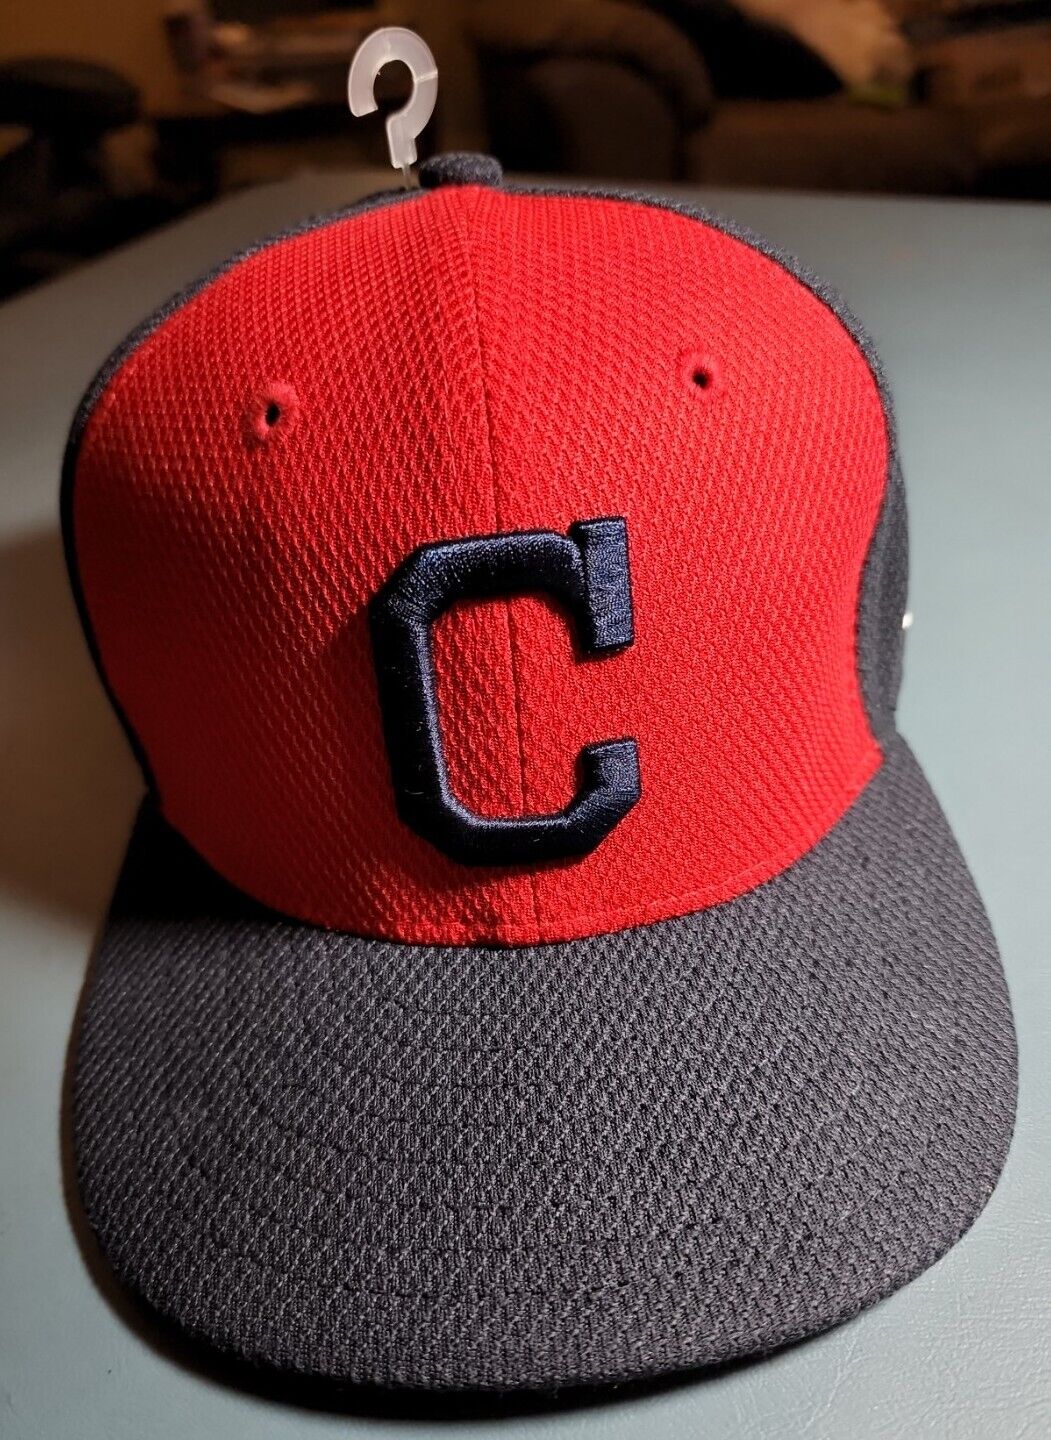 NewEra Cleveland Guardians / Indians 59FIFTY Fitted Hat Cap Black Red 6 3/8  NWOT